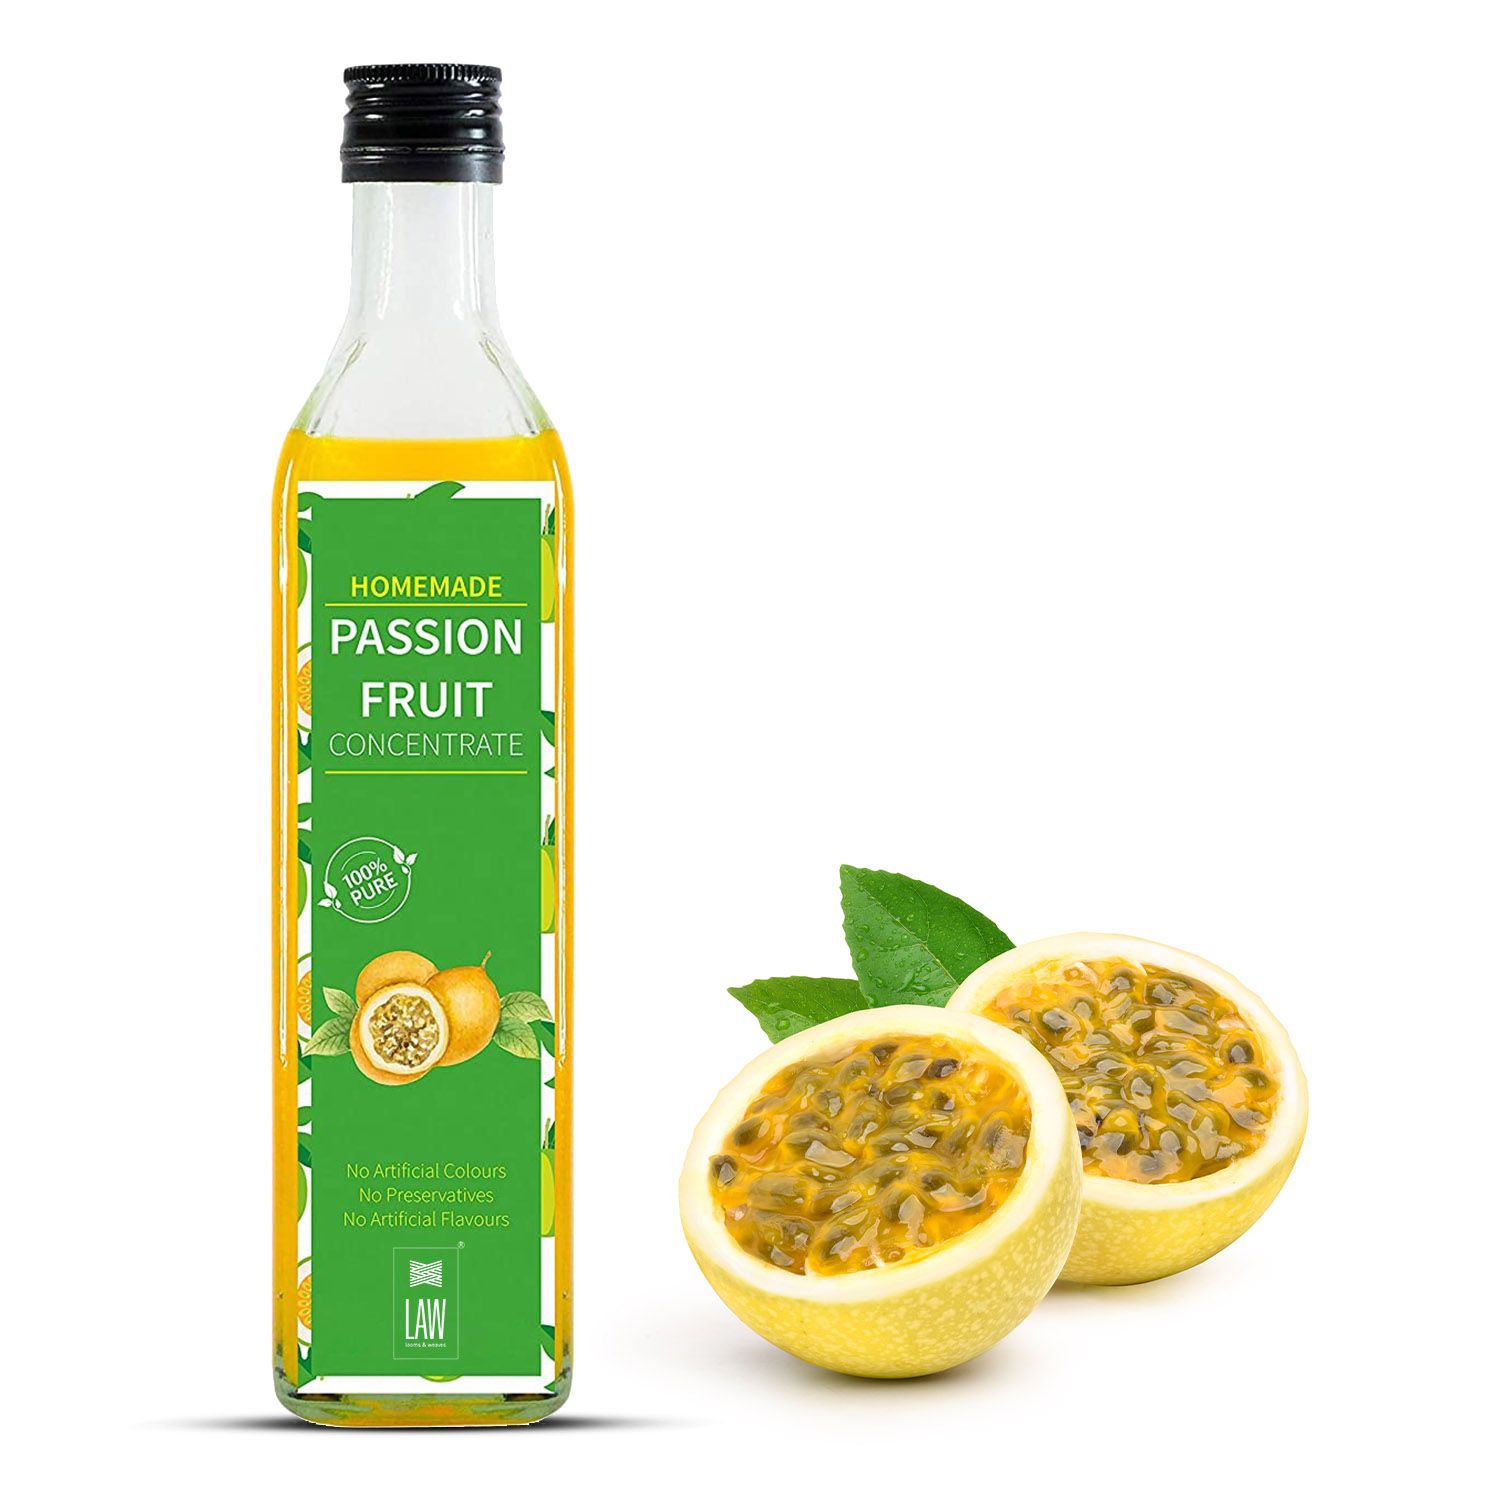 Homemade Passion Fruit Concentrate – 500 ml